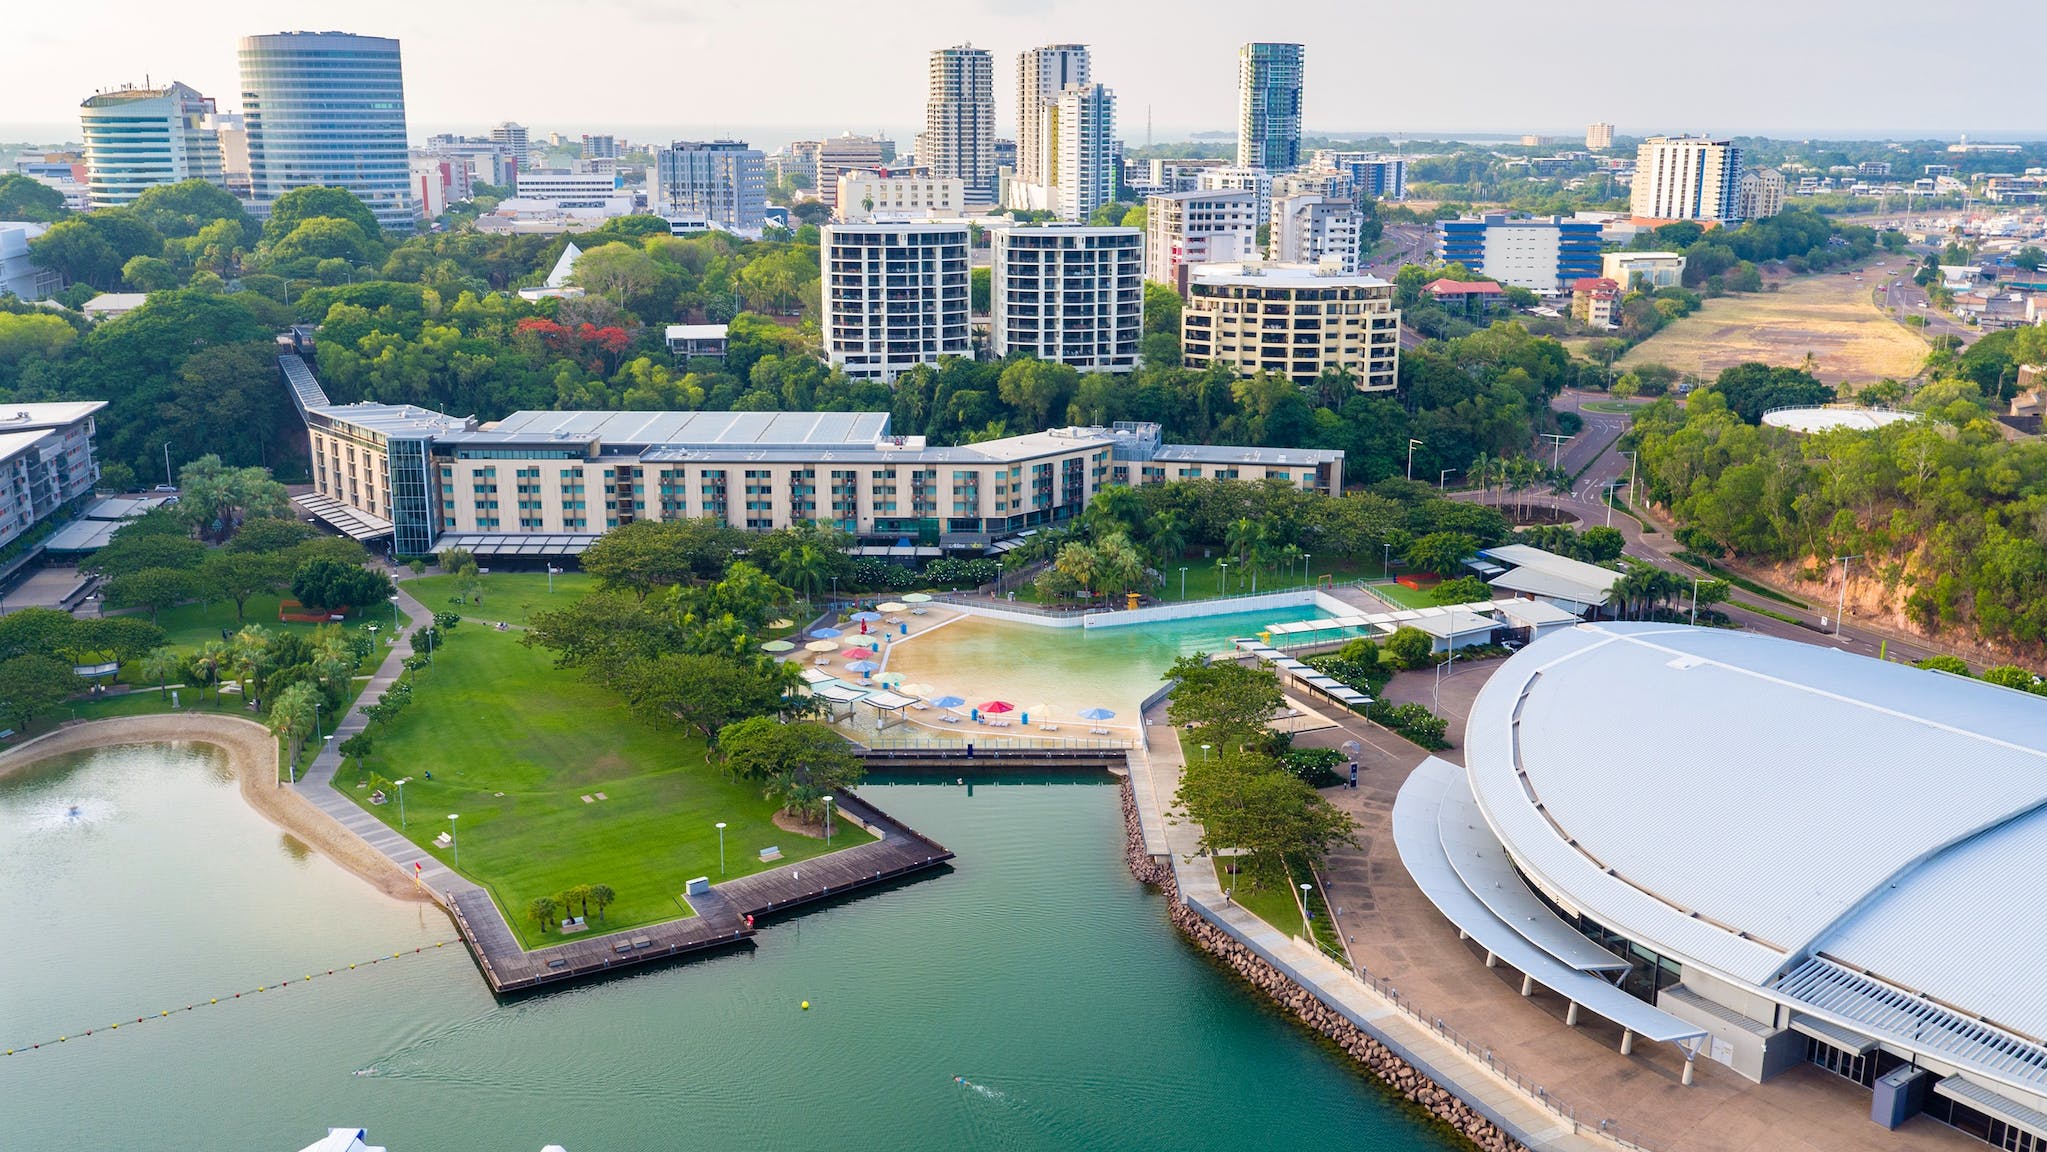 Overlooking the Darwin Waterfront  Wavepool and Lagoon and the shopping and dining precinct